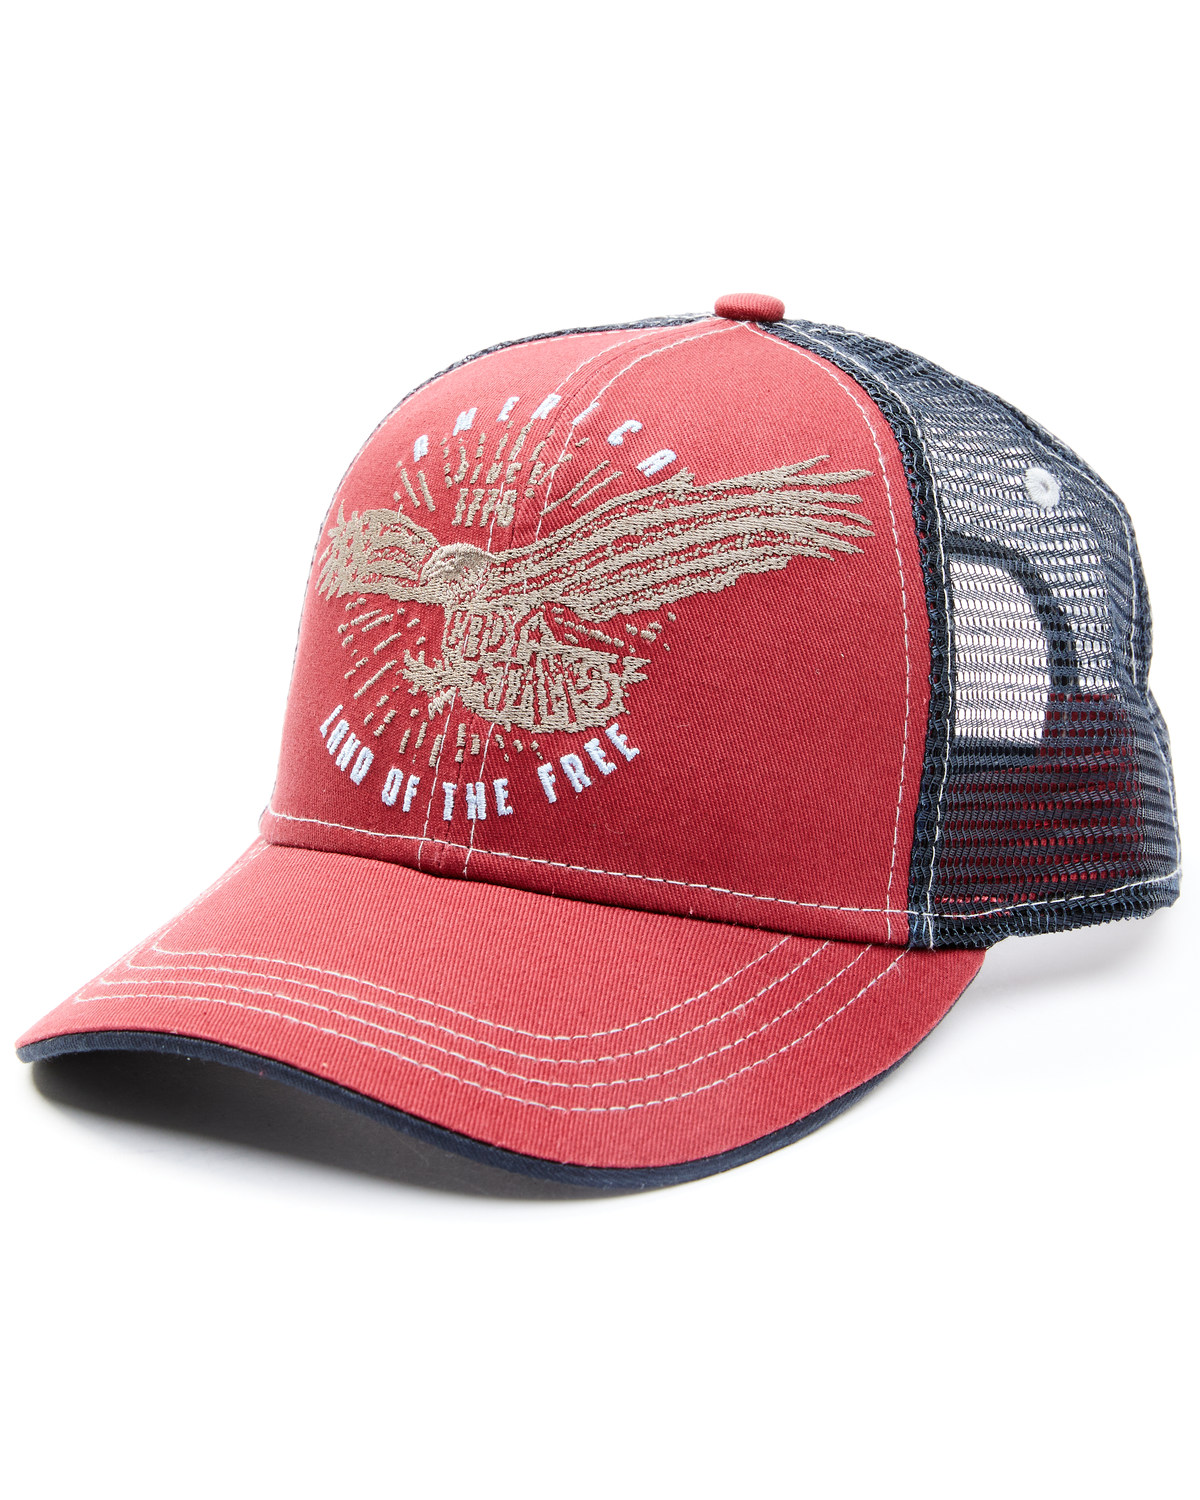 Cody James Men's Land Of The Free Embroidered Ball Cap